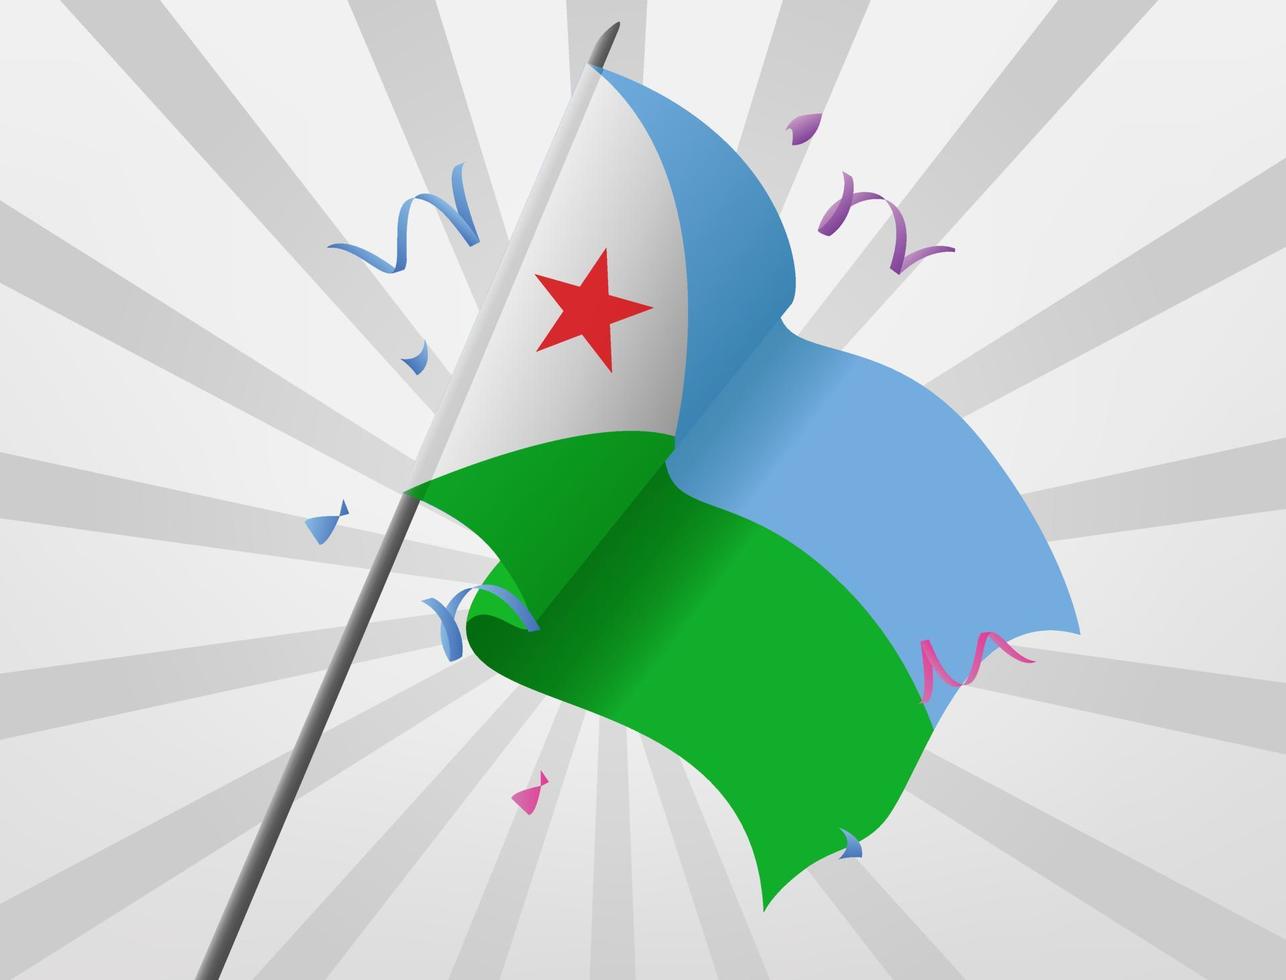 The celebratory flag of Djibouti is flying at high altitudes vector